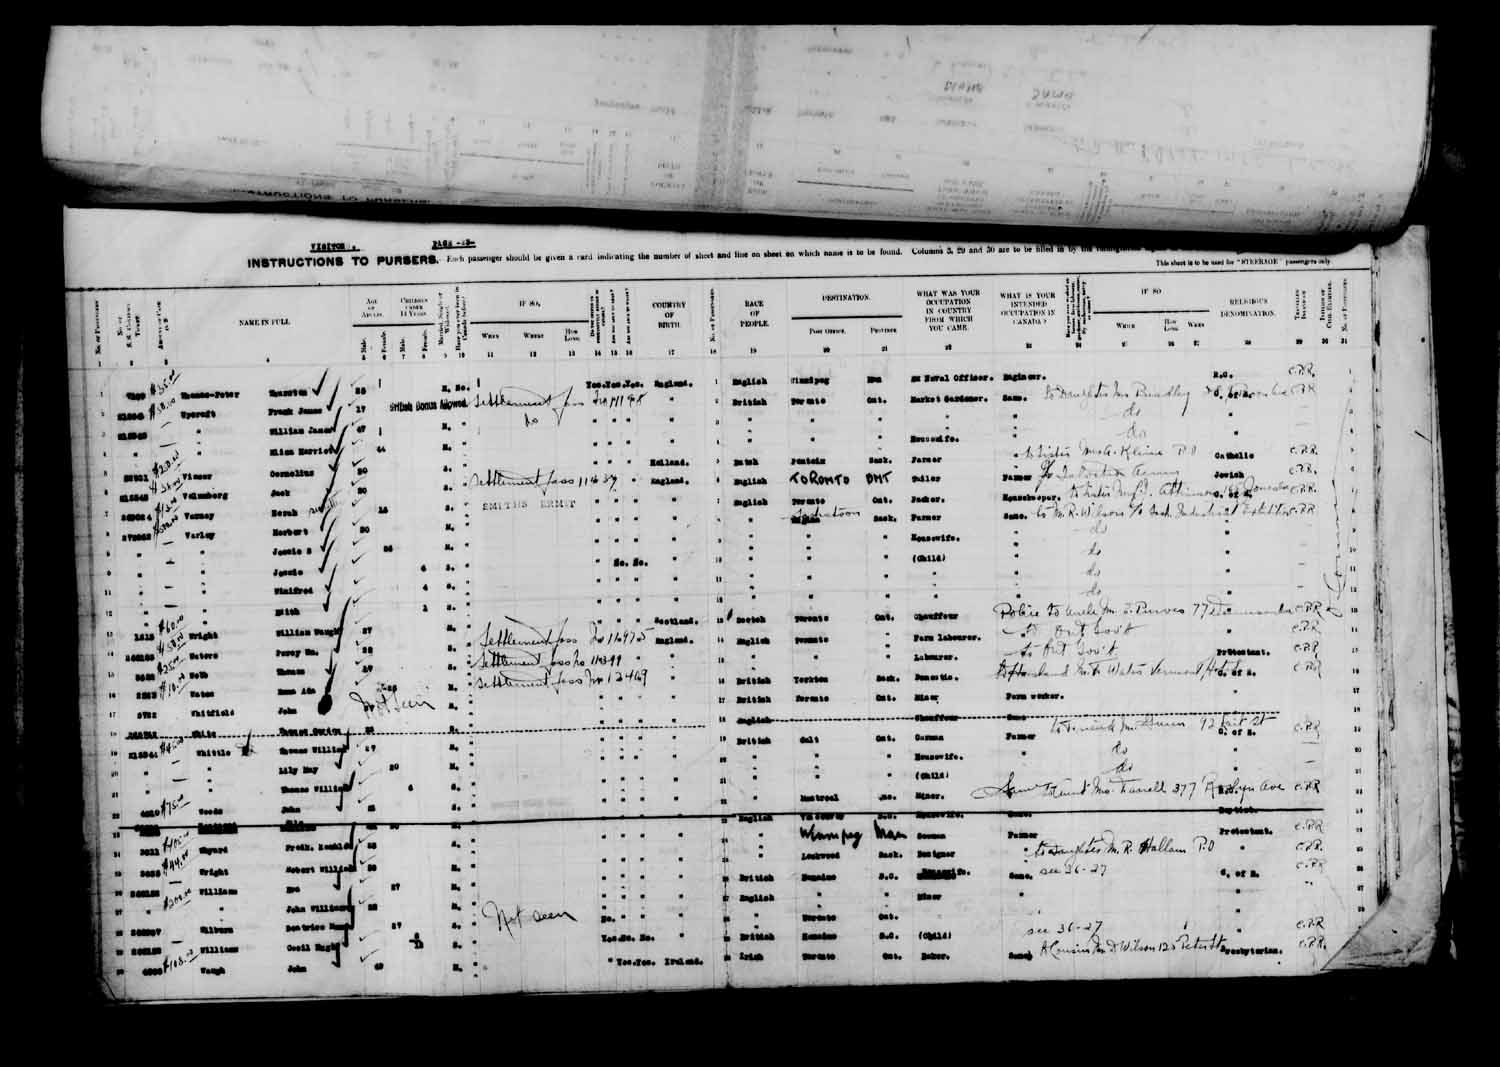 Digitized page of Passenger Lists for Image No.: e003610663